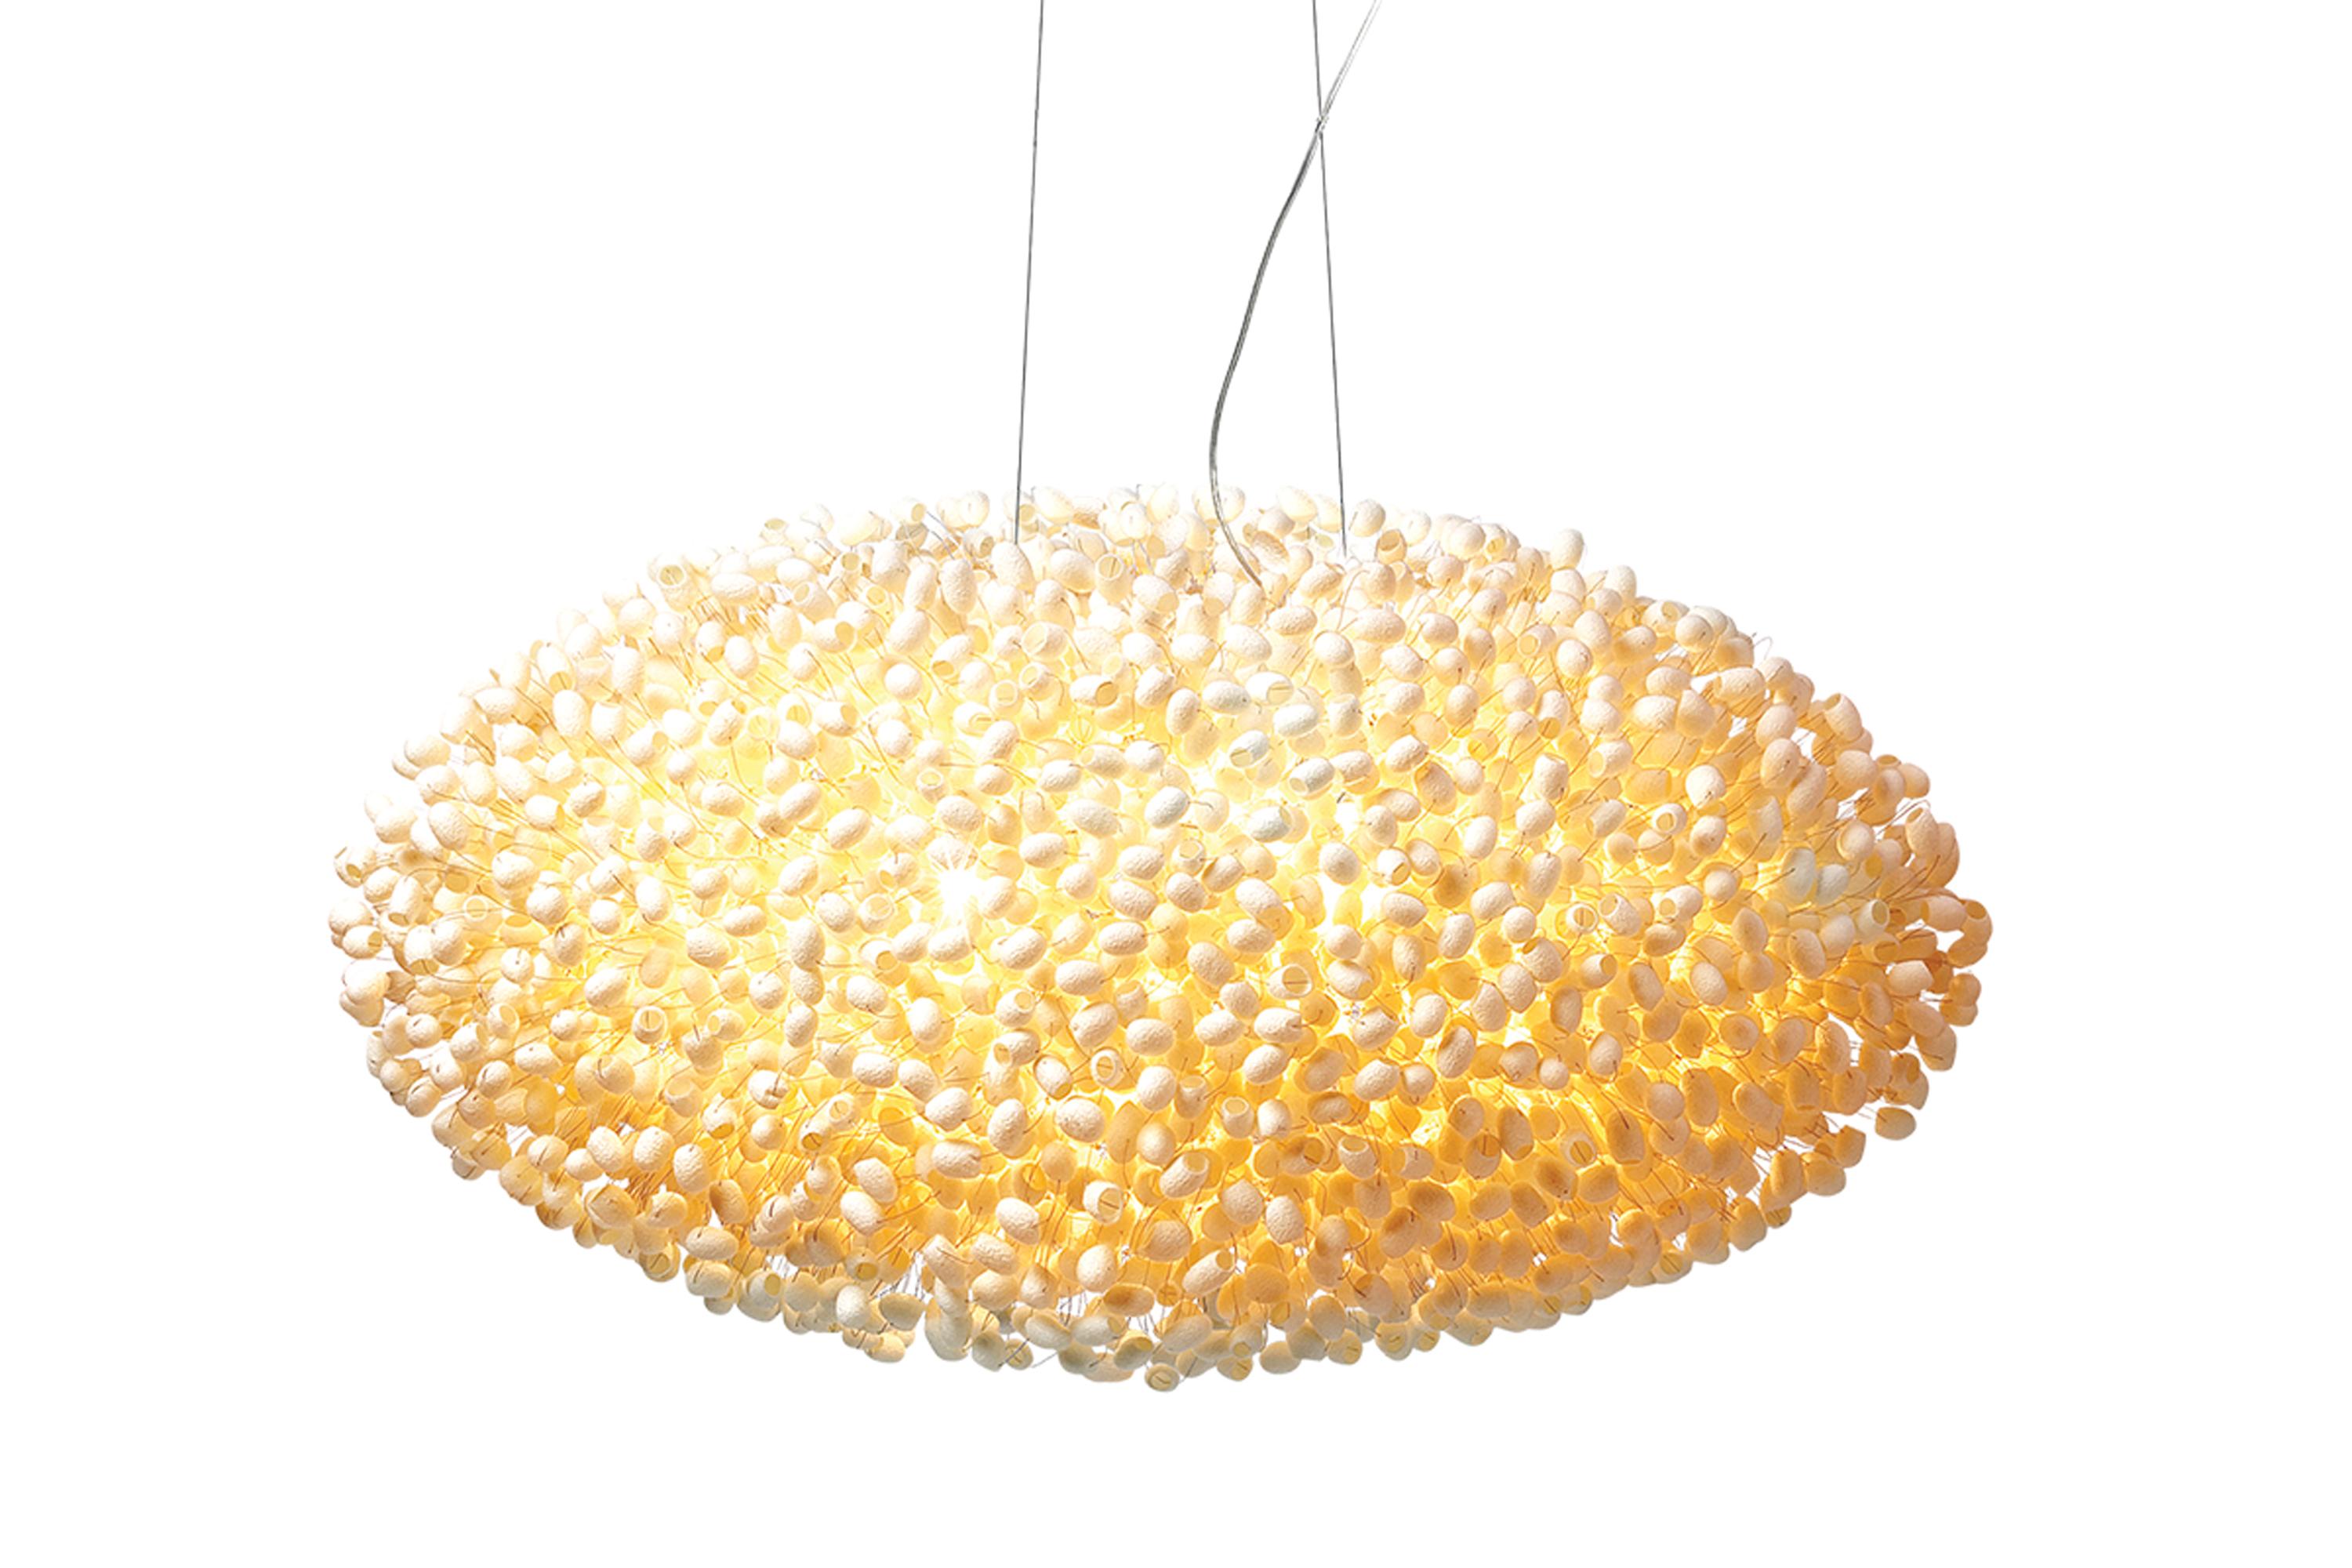 For Paradise pendant lighting design, the miracle of each silk cocoon being formed by its creator is taken and exploited to the full by illuminating it from within with two light sources.

In Paradise, we build up a hand welded steel structure (each